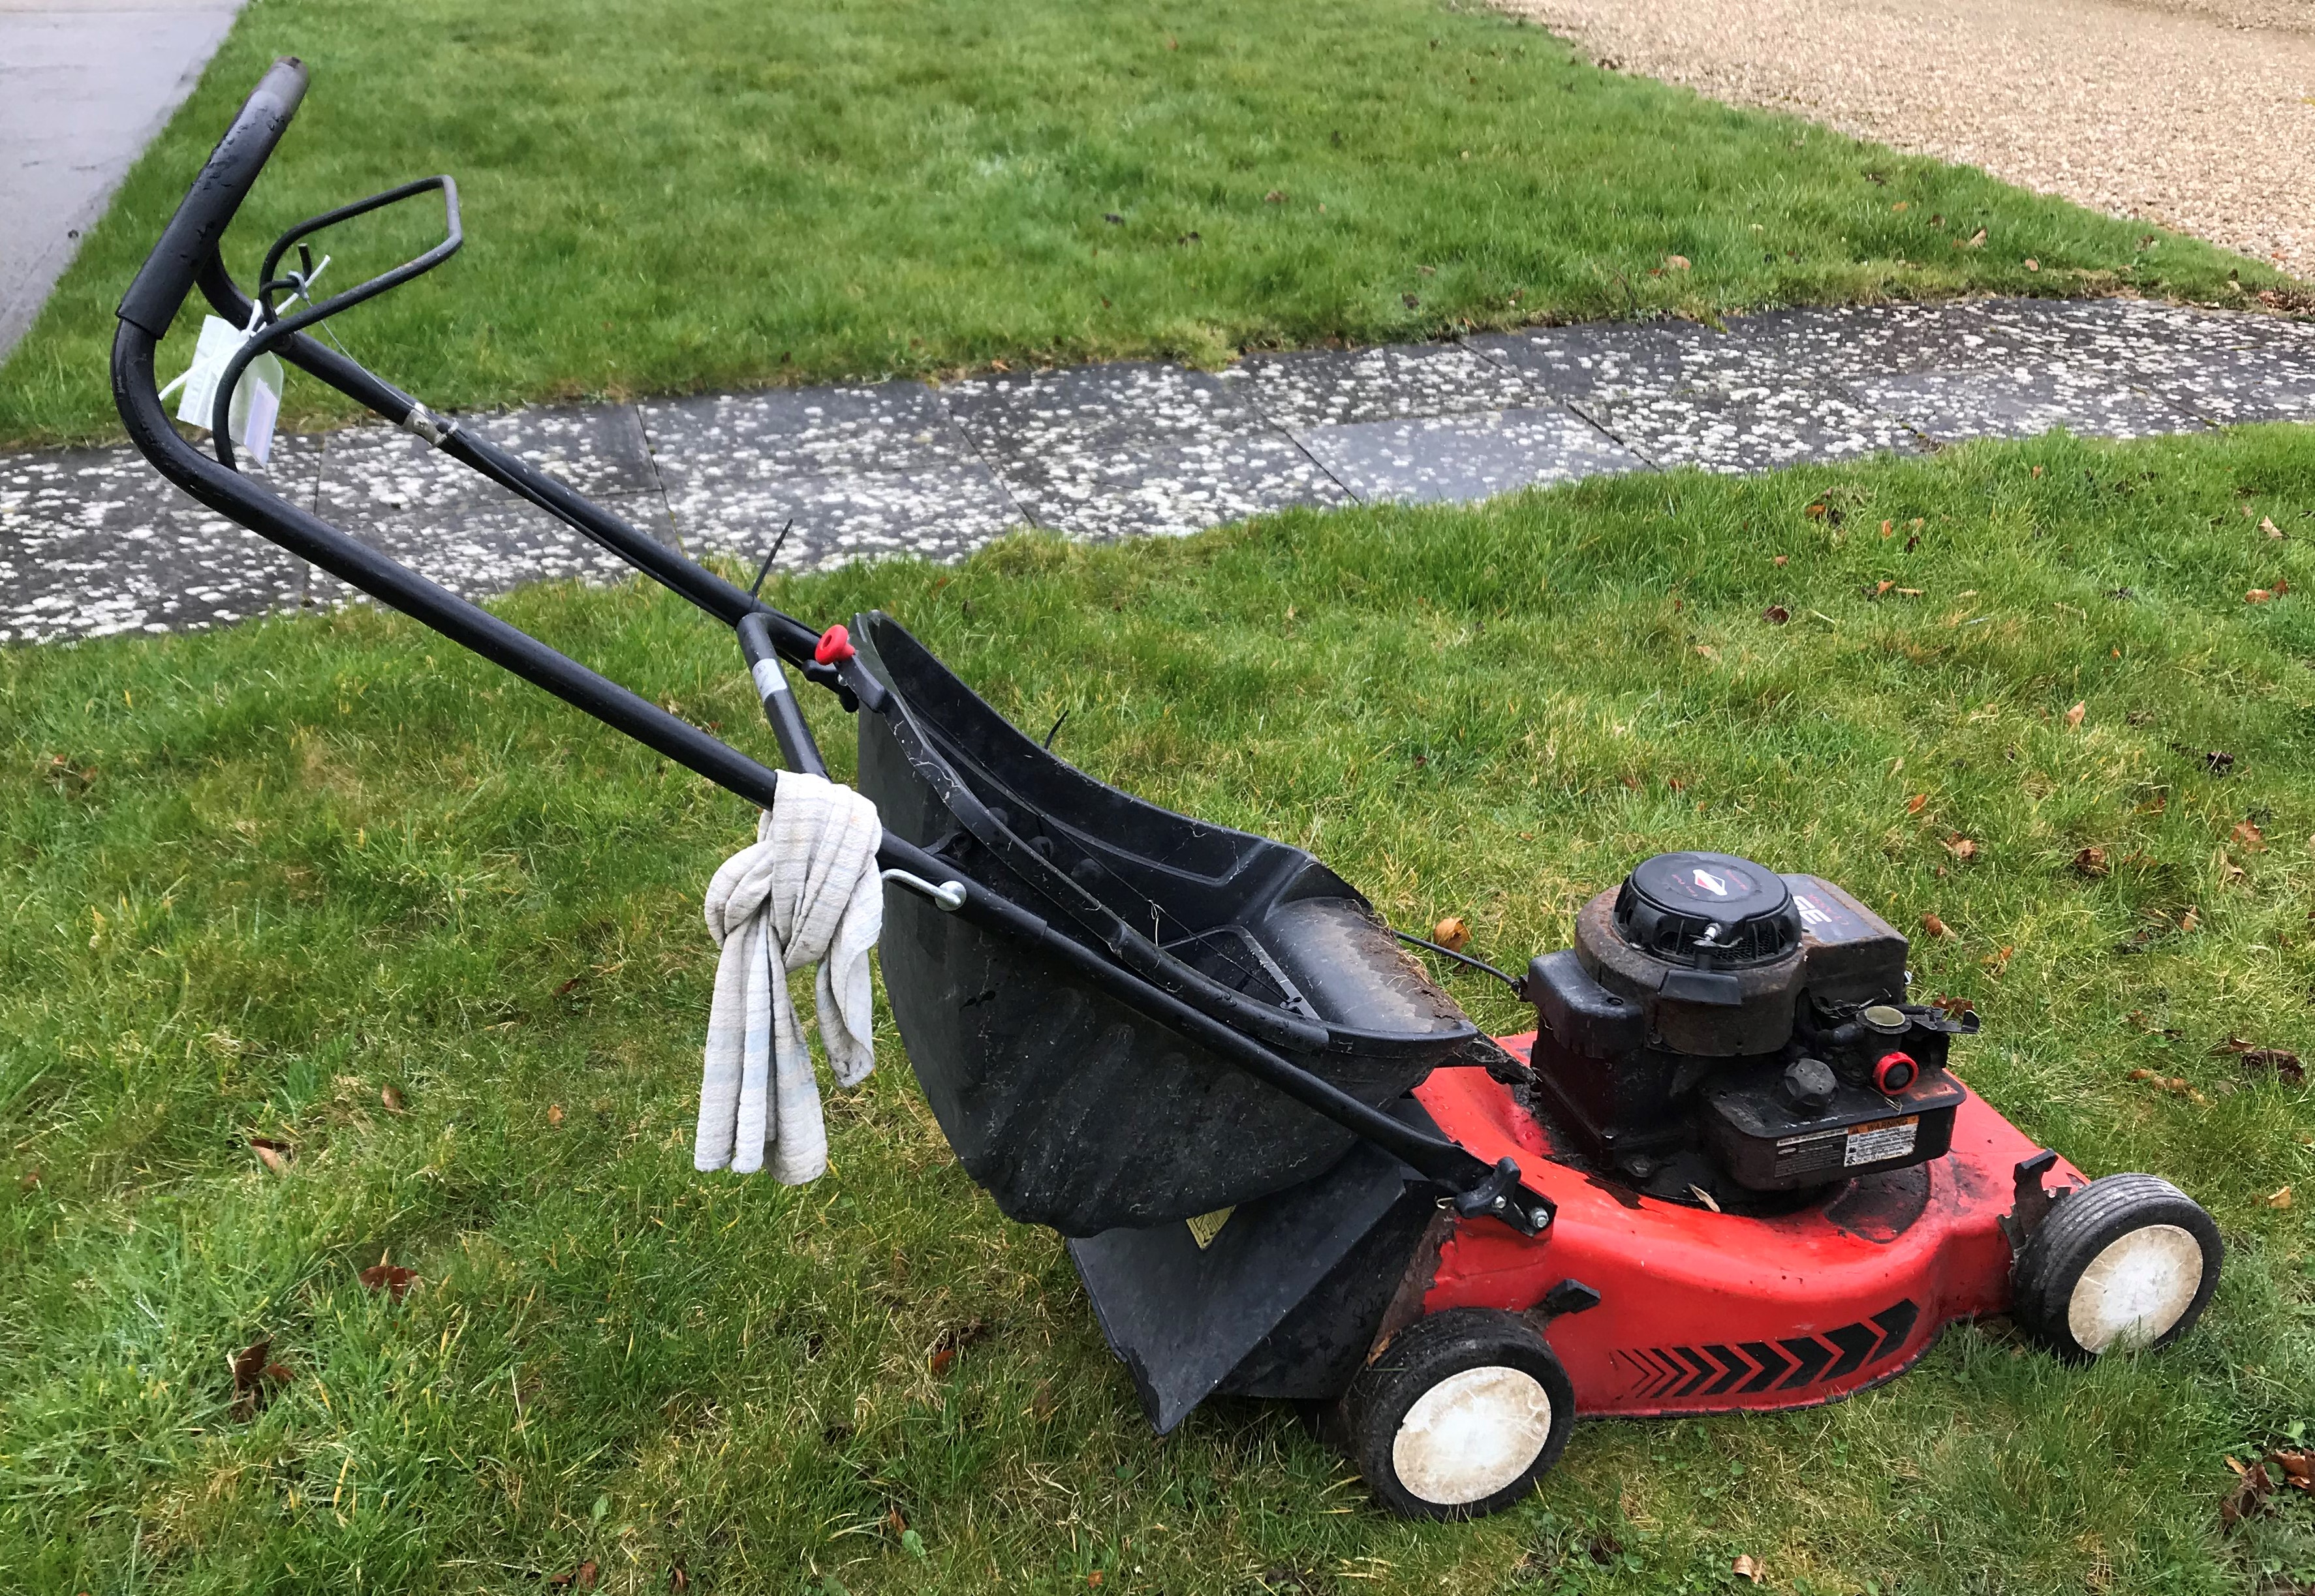 A Lawn King NG464 petrol driven lawn mower with Briggs & Stratton 35 Classic petrol engine,